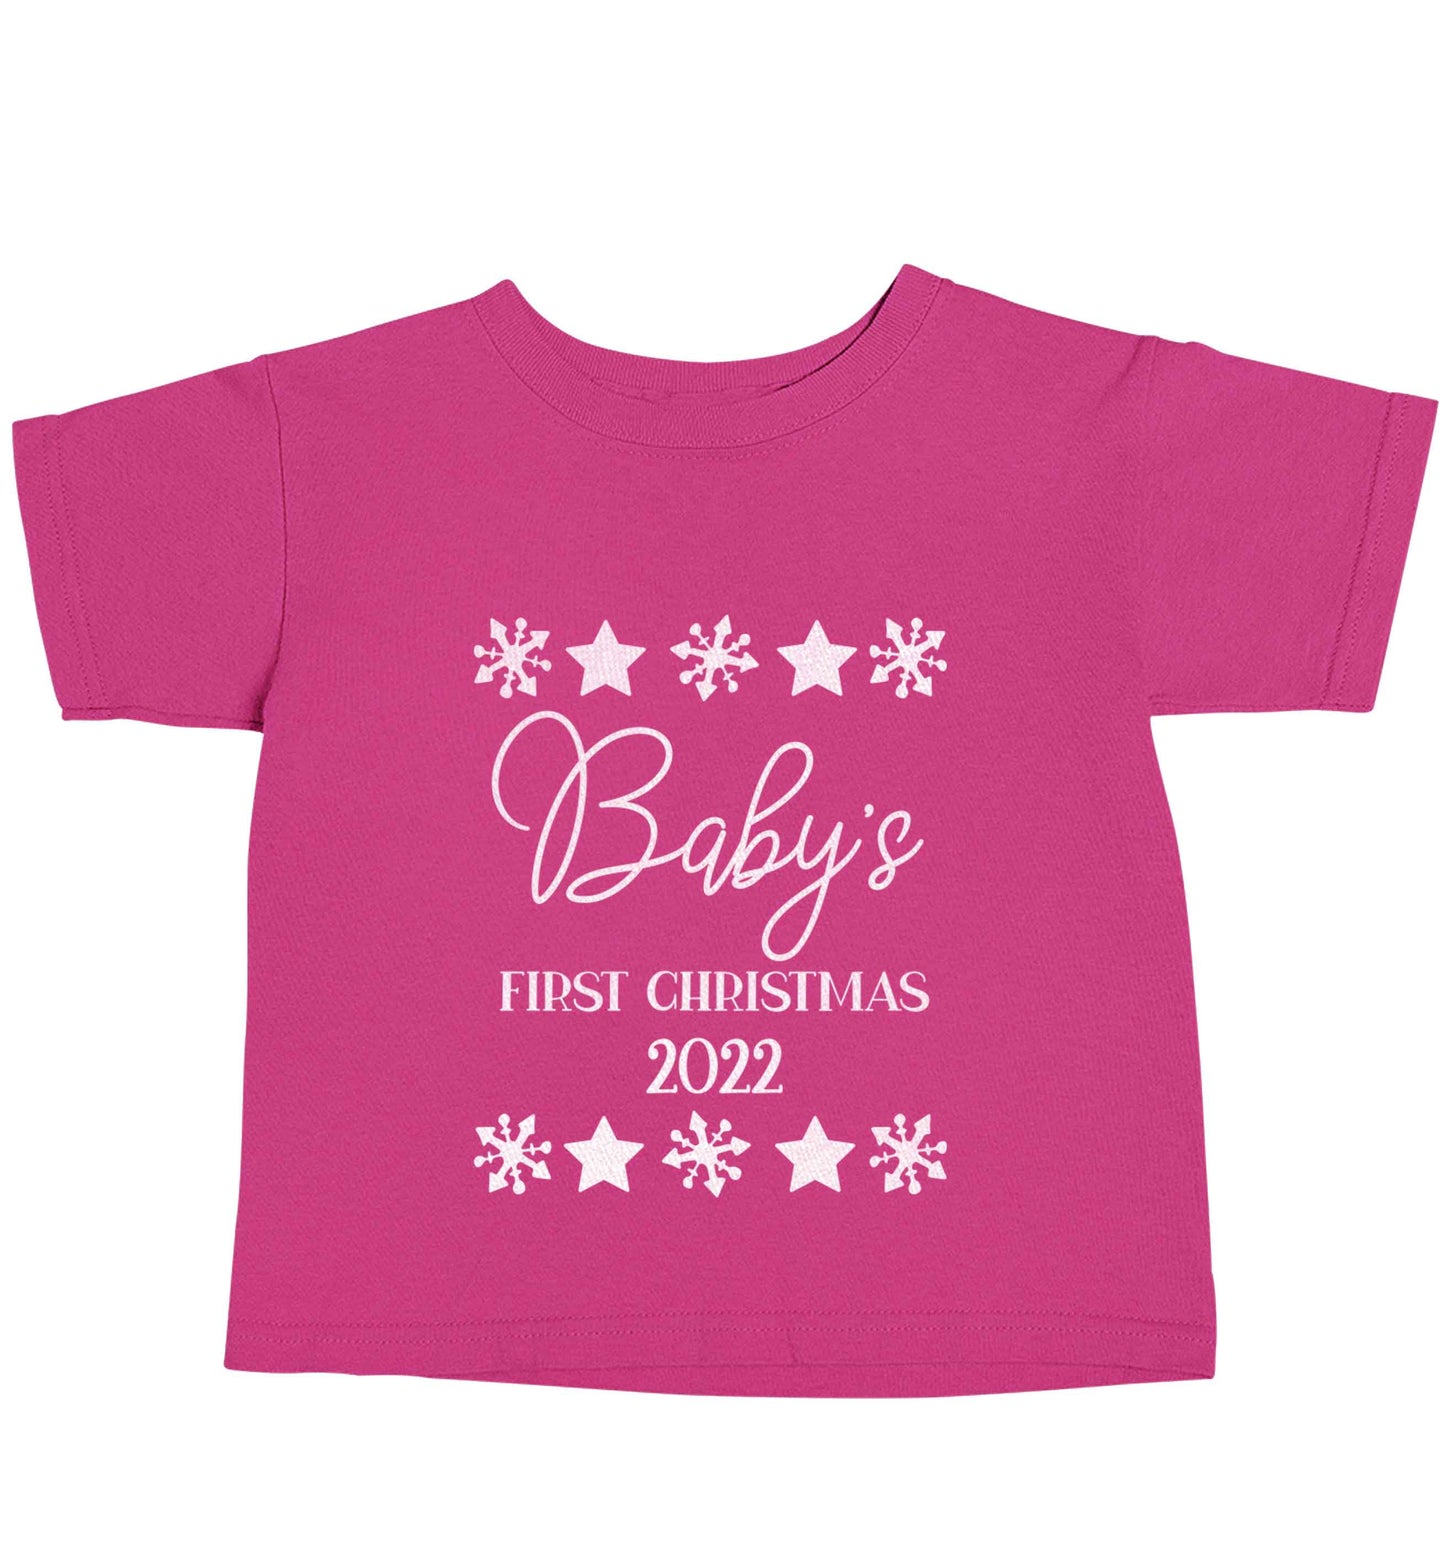 Baby's first Christmas pink baby toddler Tshirt 2 Years